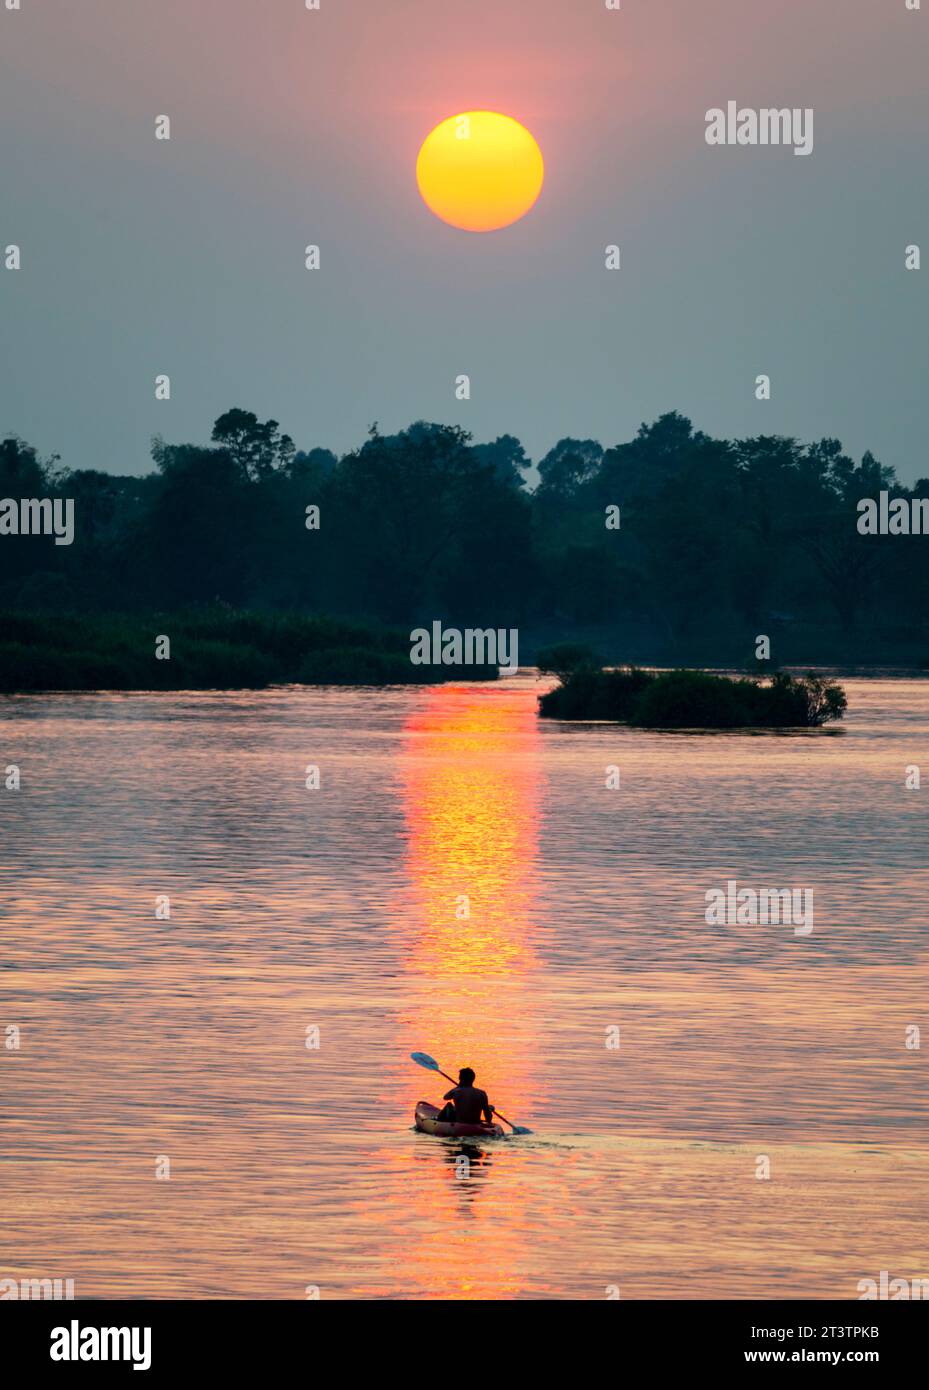 Silhouette of a human figure in a Kayak,drifting across the calm,peaceful waters of the Mekong,through rays of golden light reflected on the water sur Stock Photo